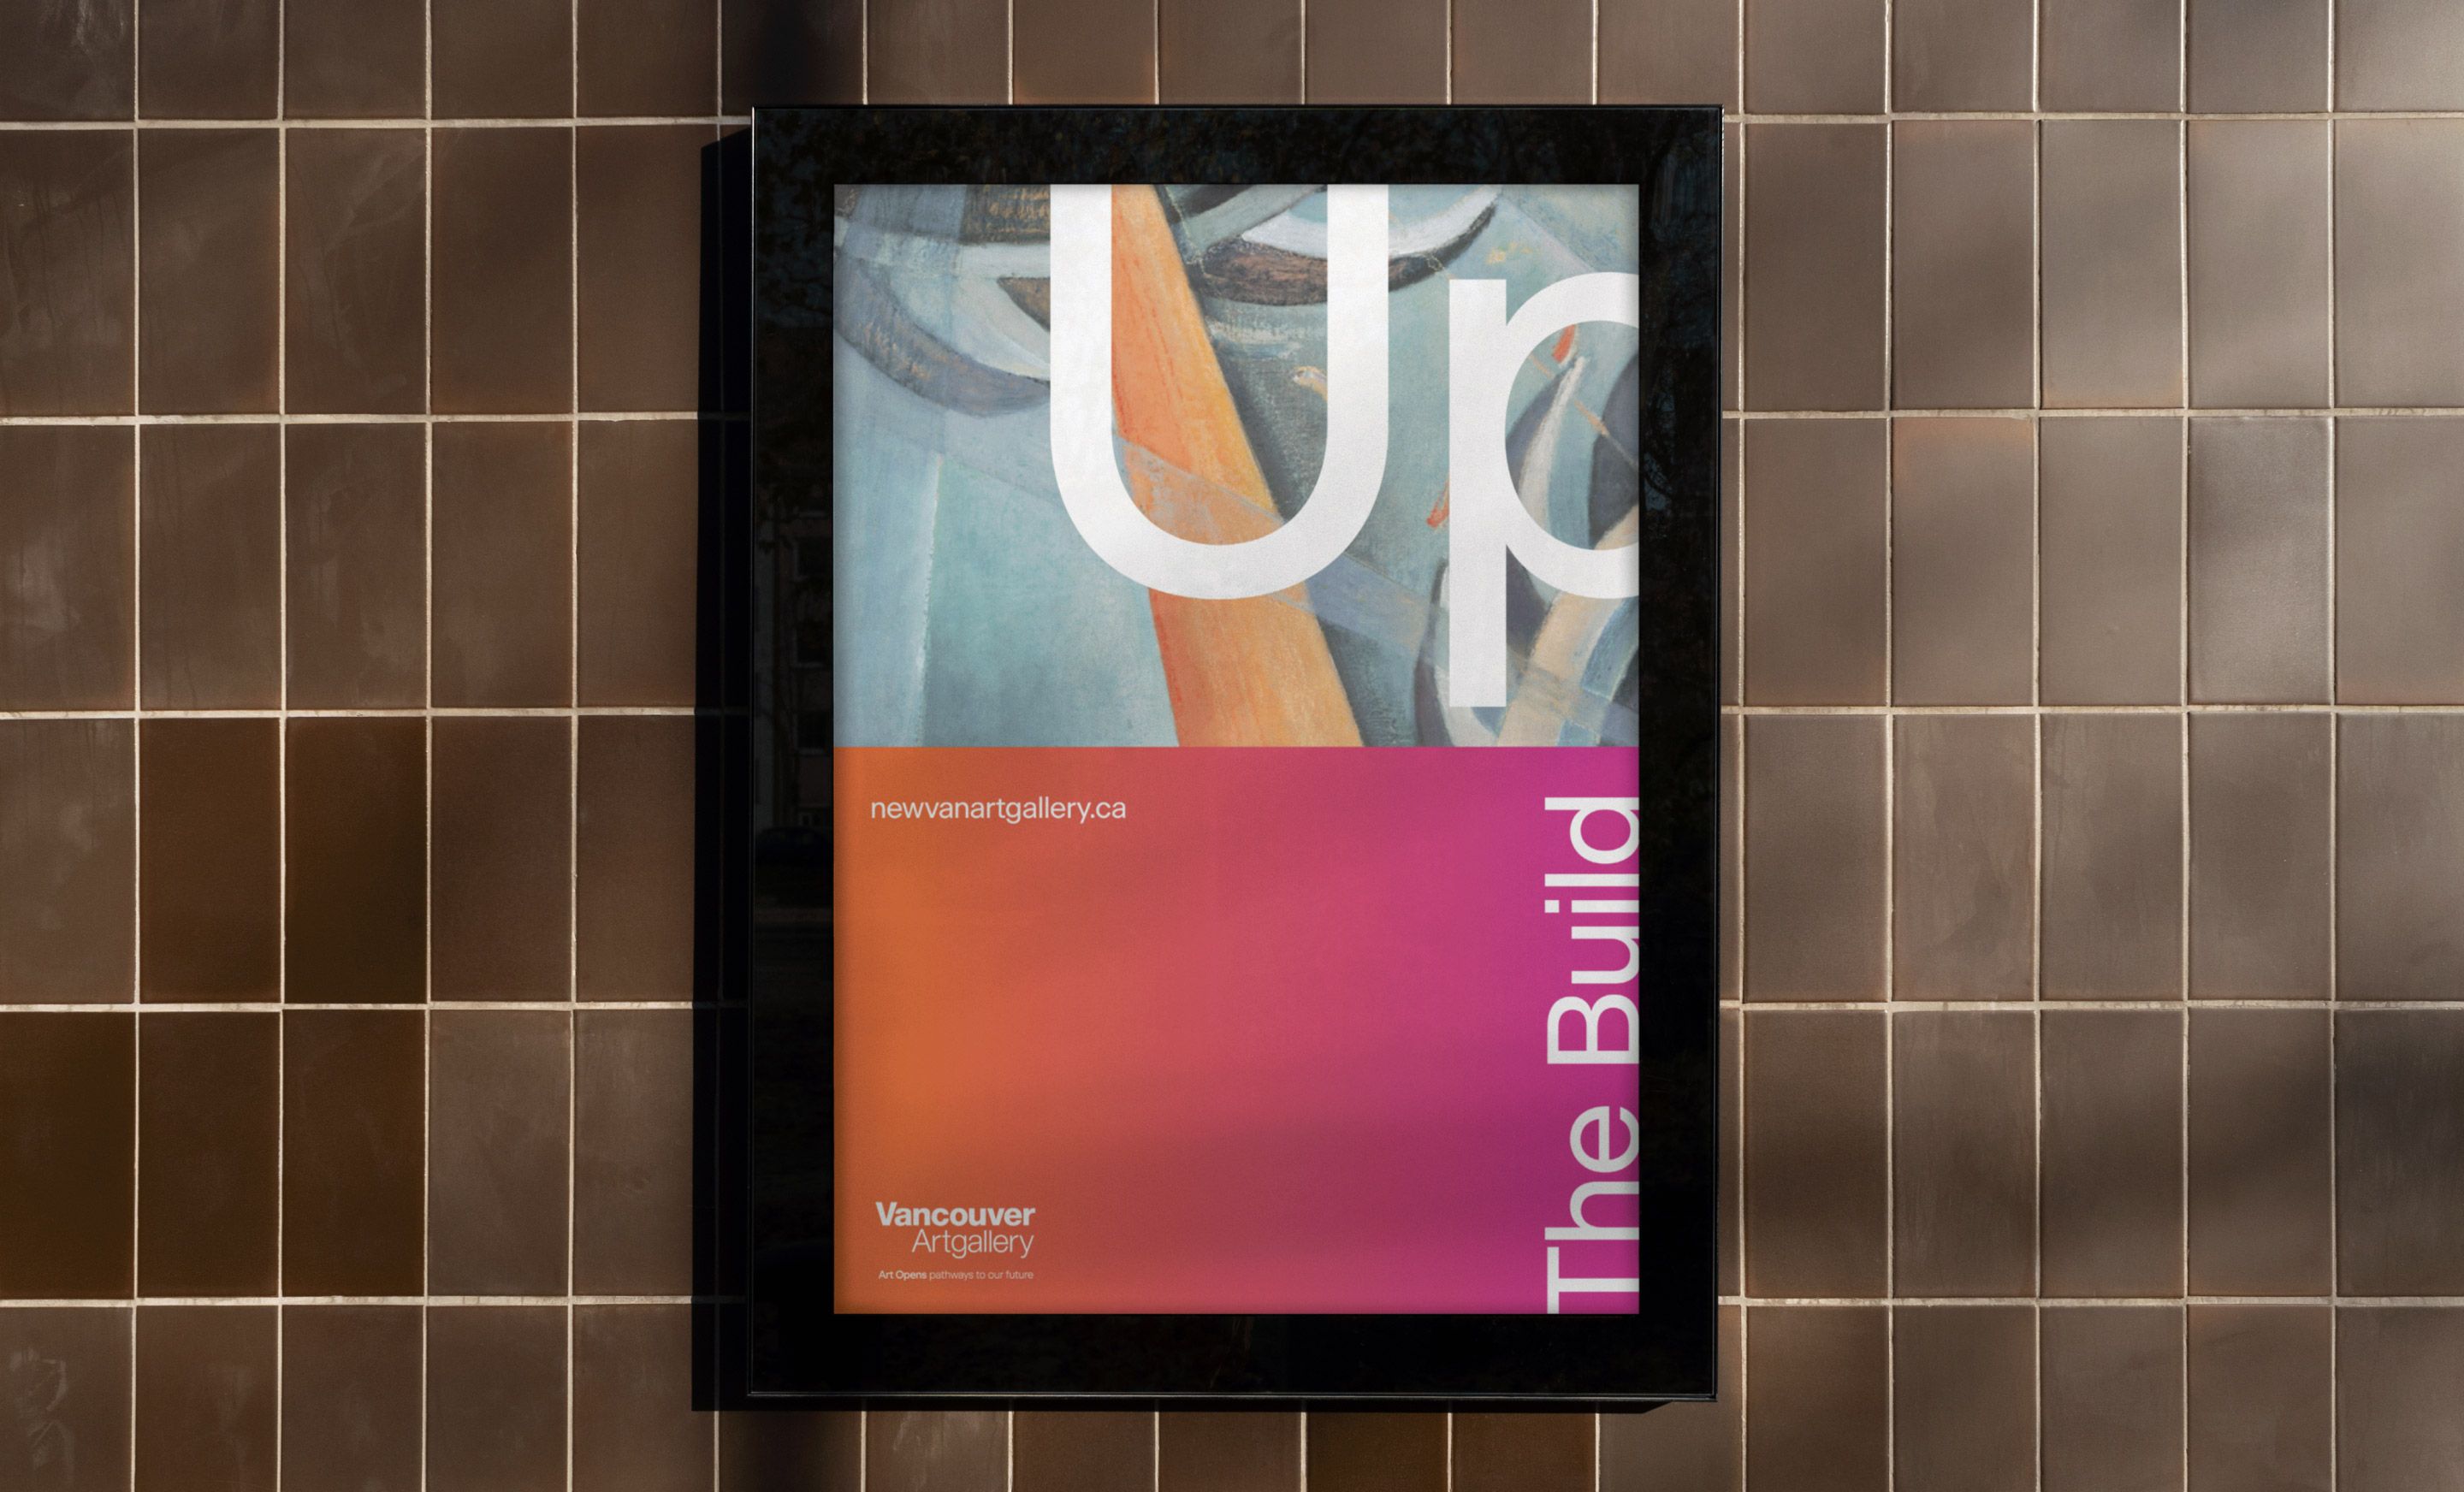 Transit display application. Vancouver Art Gallery campaign.